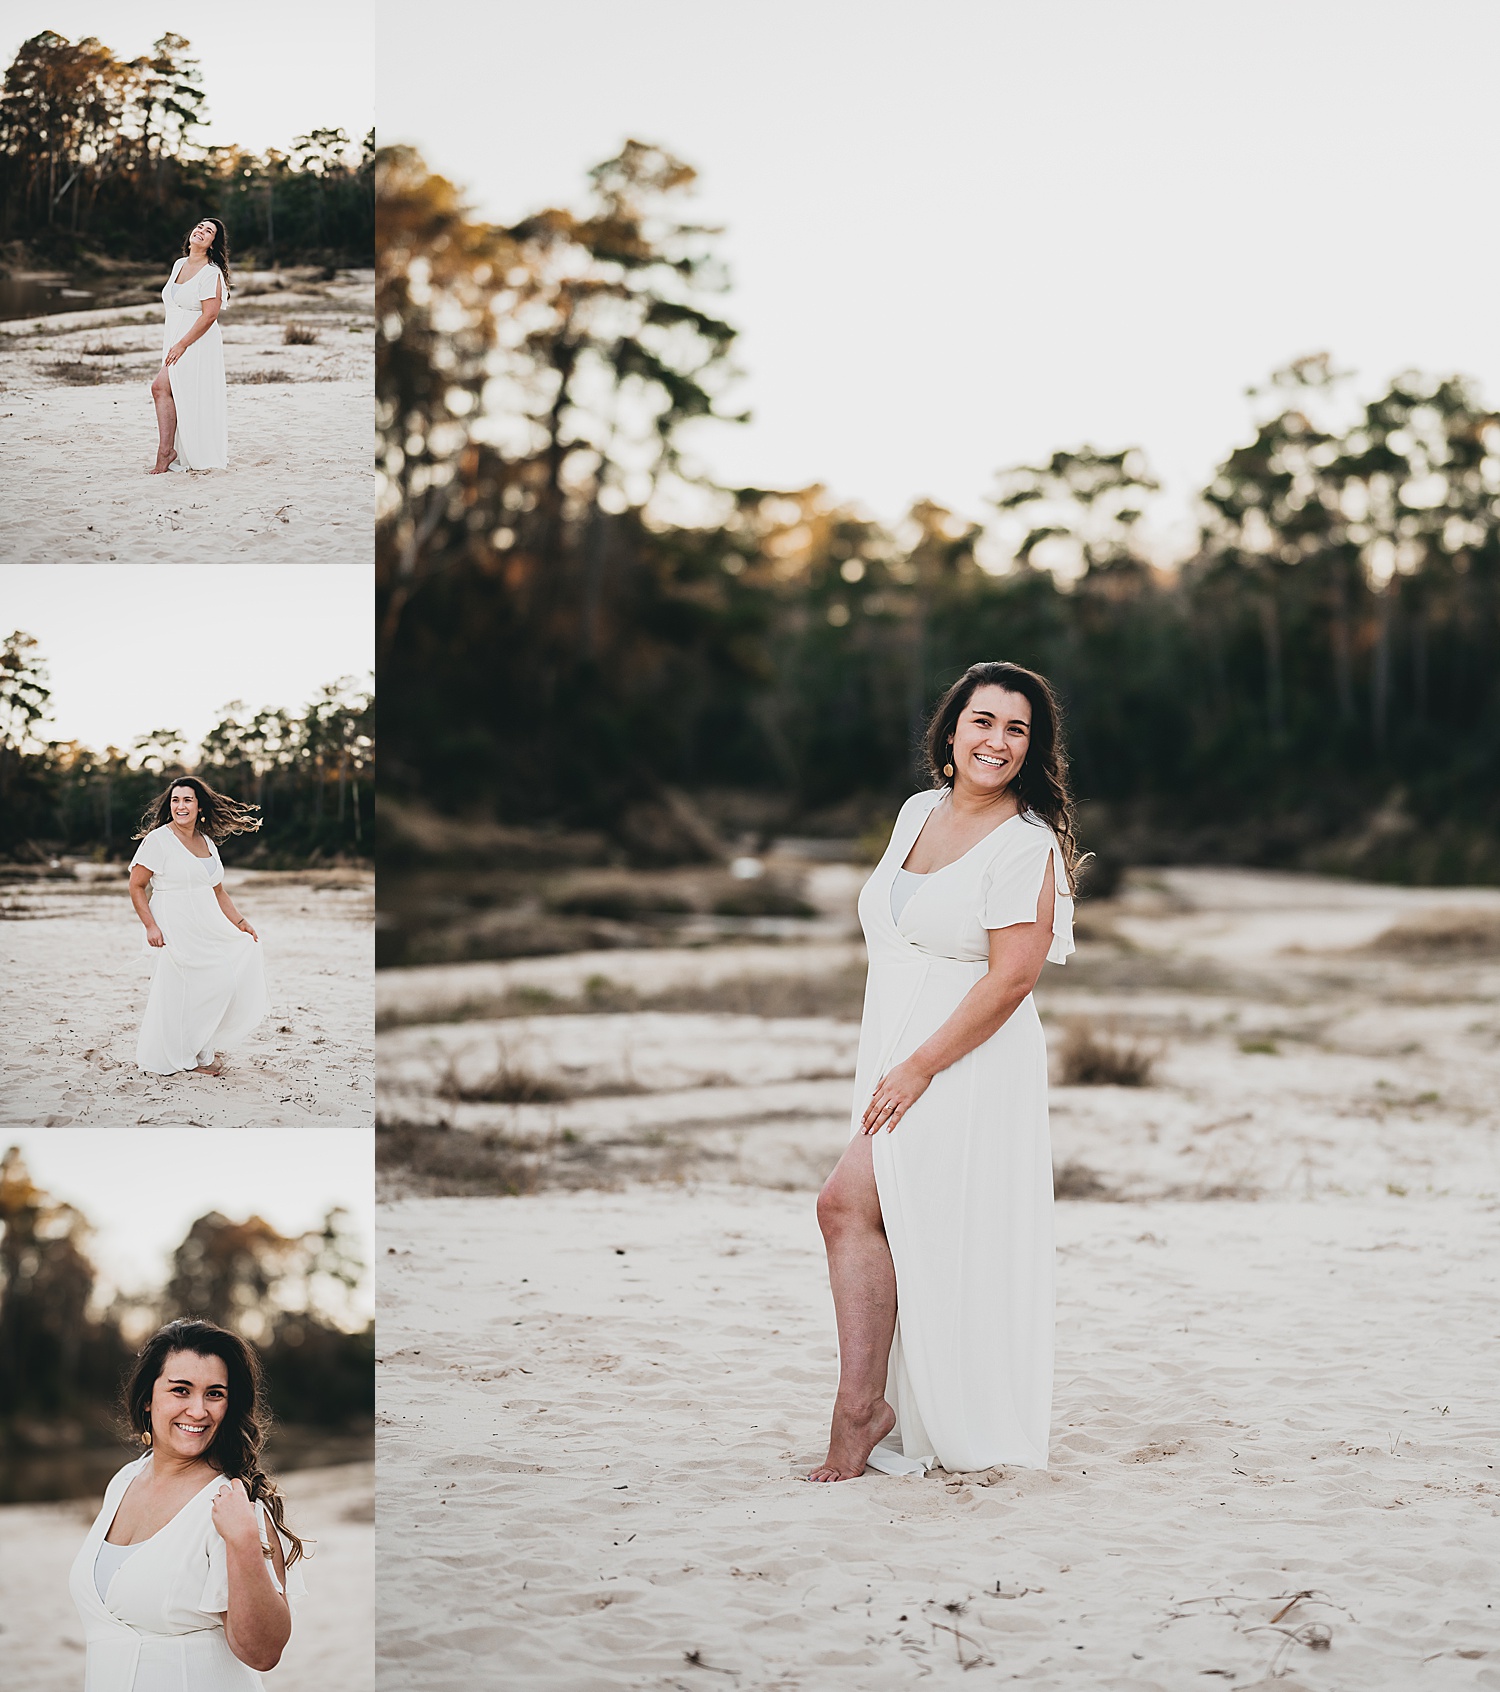 newly engaged woman dancing on beach with Houston wedding photographer